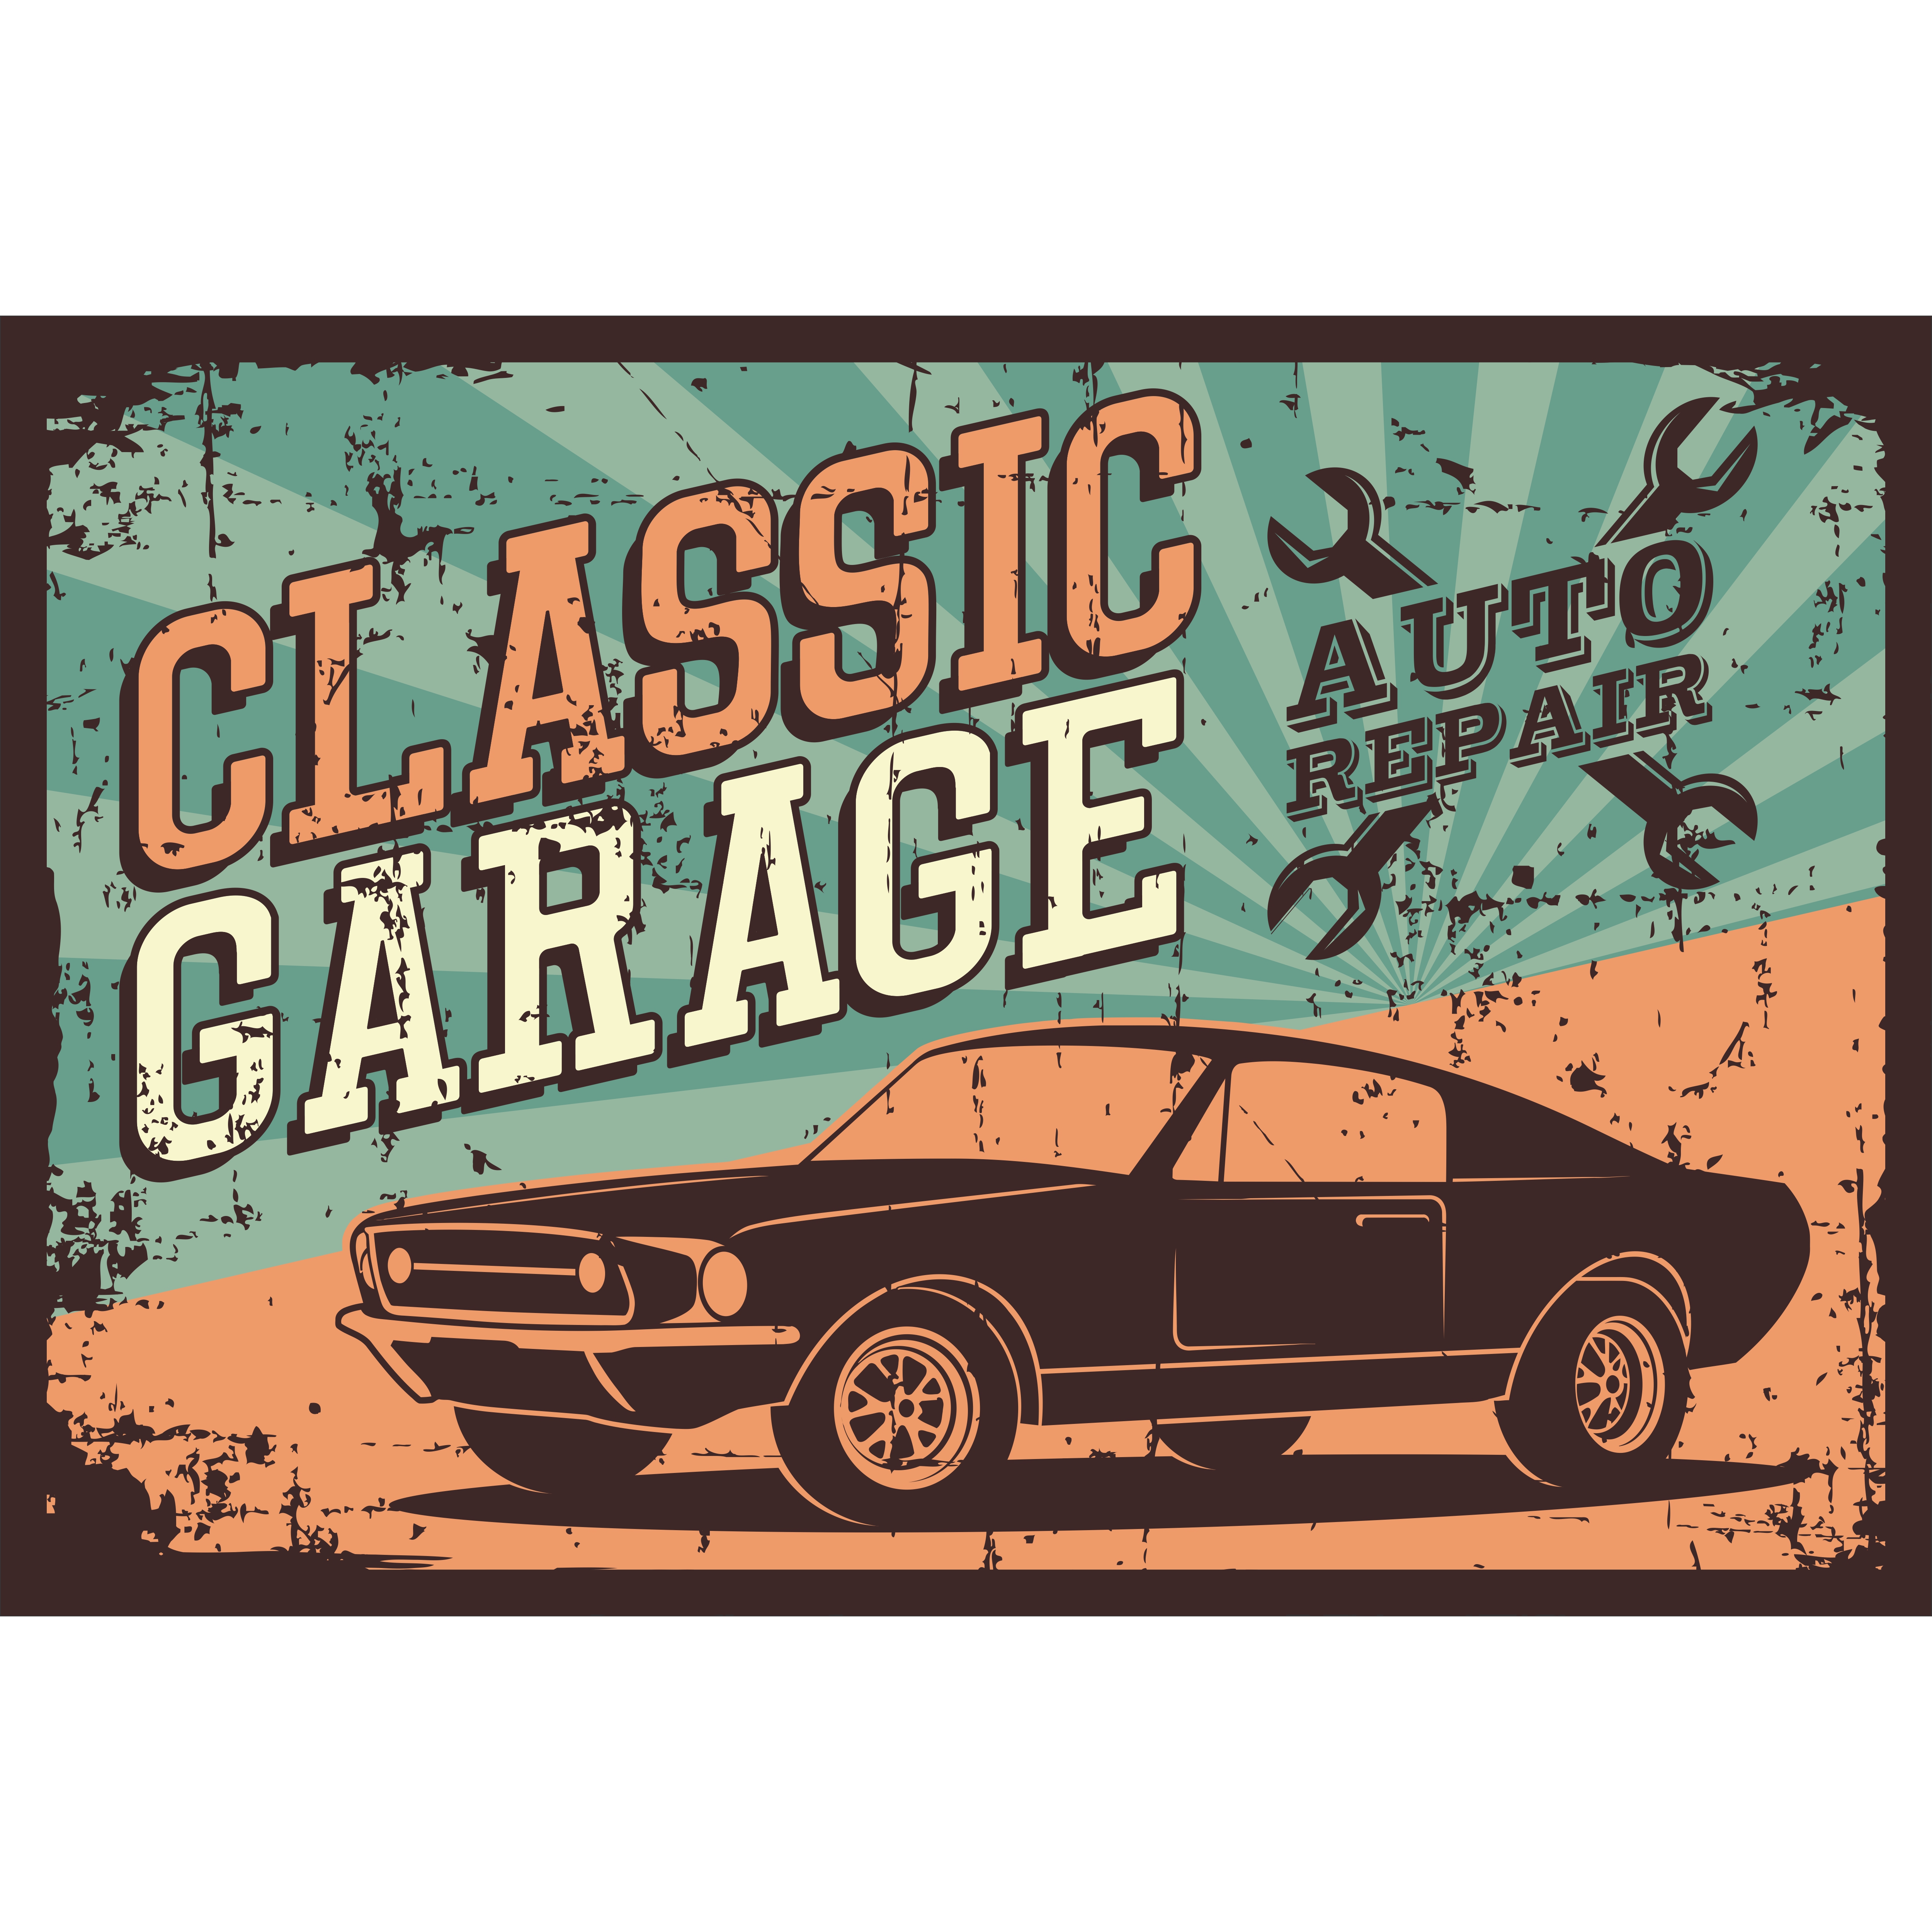 Vector illustration with the image of an old classic car, design logos ...